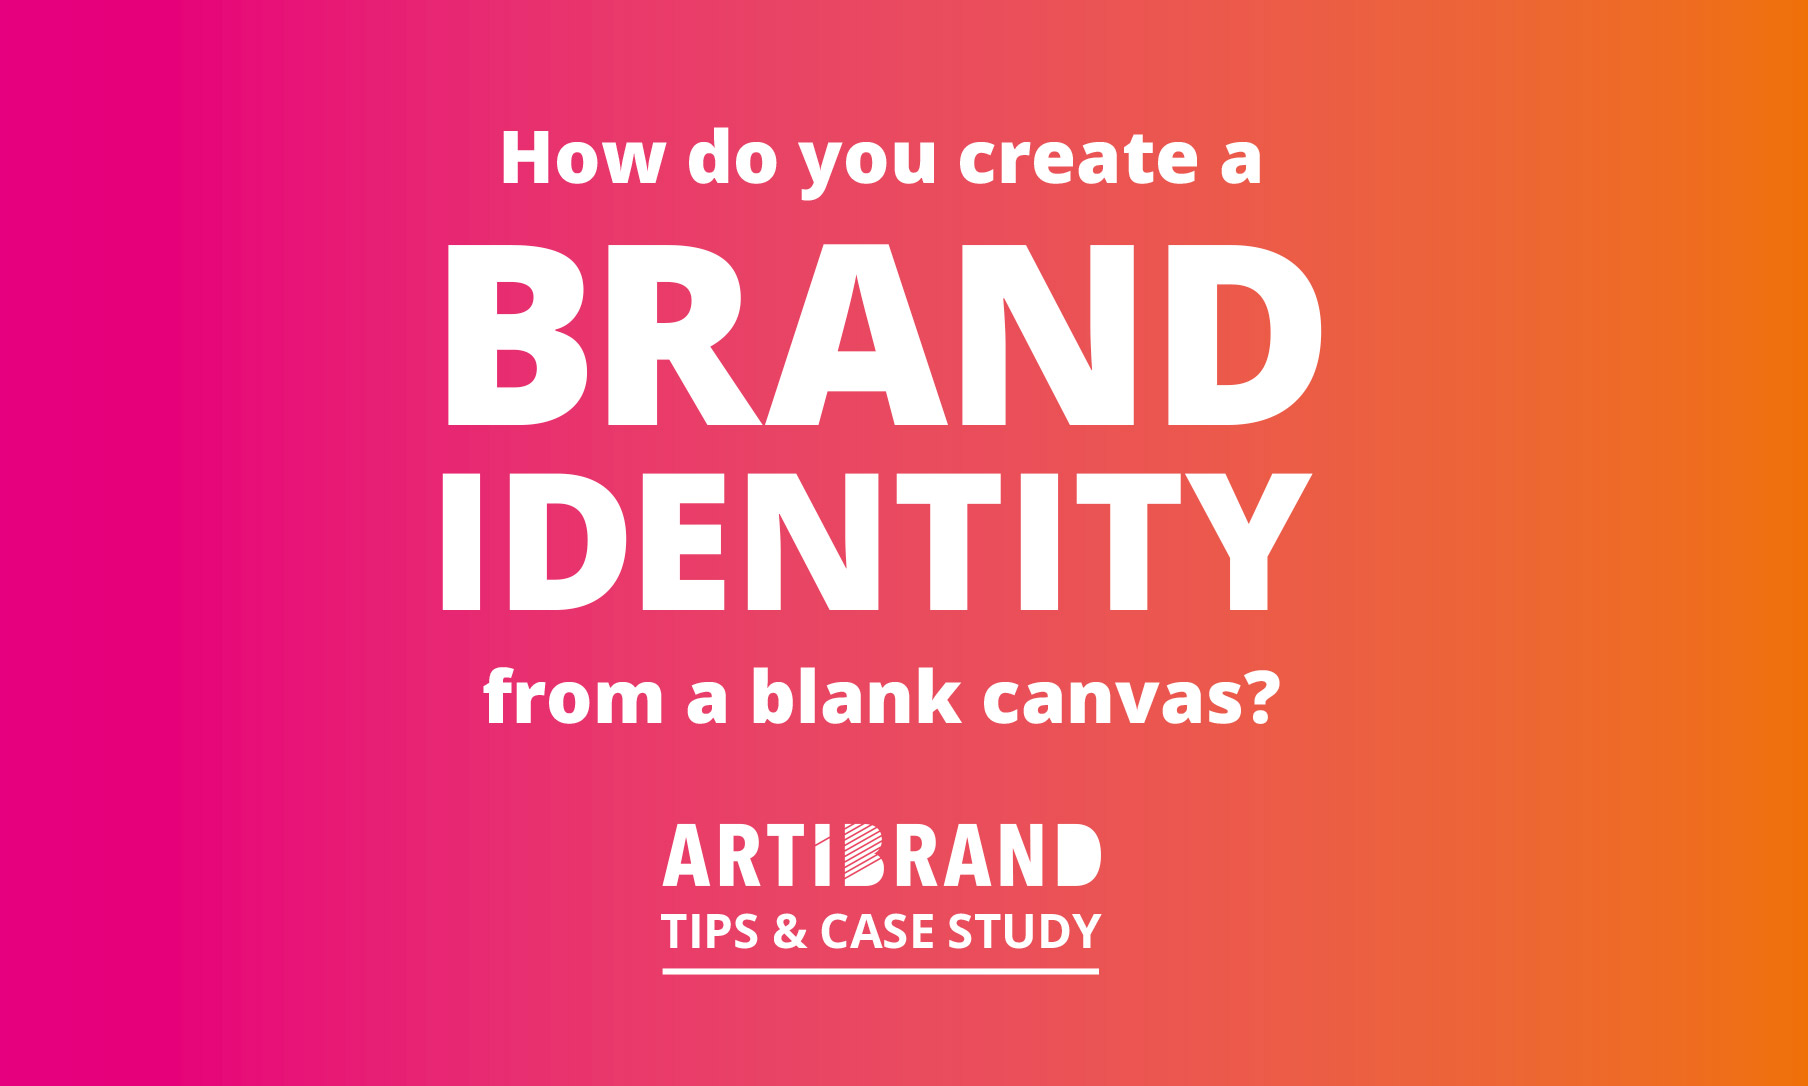 How do you create a brand identity from a blank canvas?